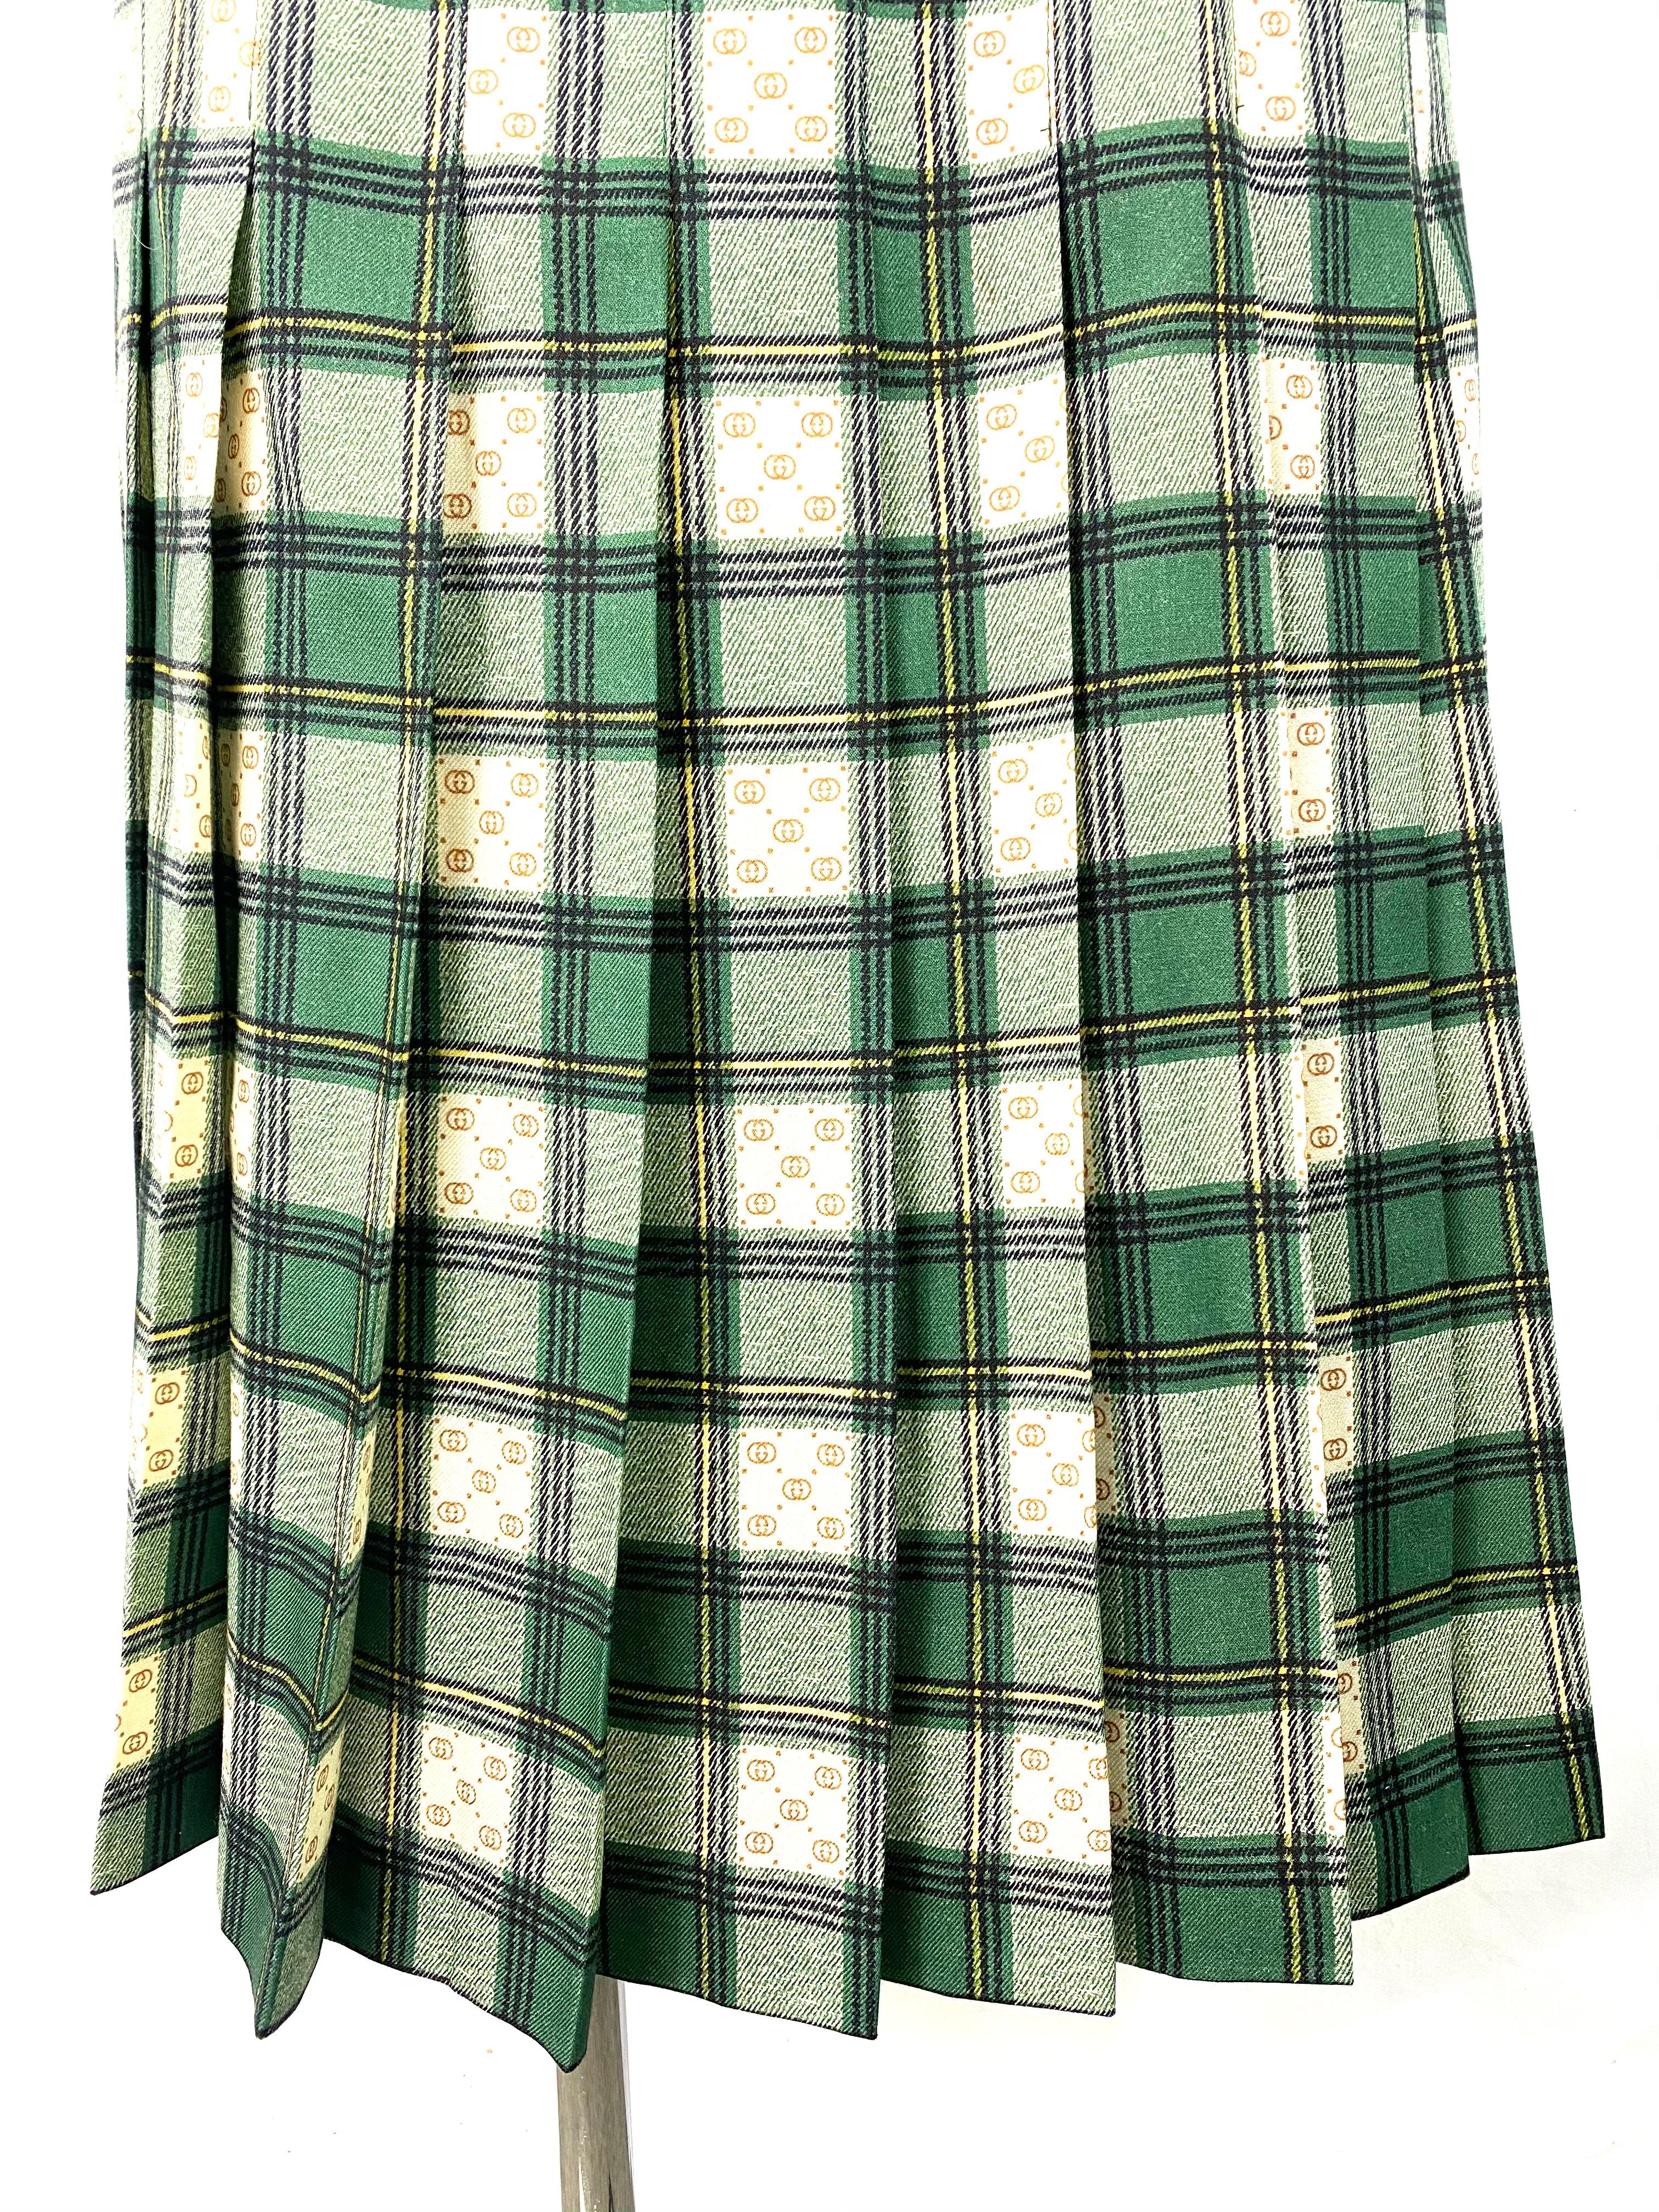 Product details:

Featuring the wool skirt with the GG motif woven between the green and beige tartan pattern. Relaxed fit with  high-rise waist and secured with two buckle-fastening tabs. Made in Italy.